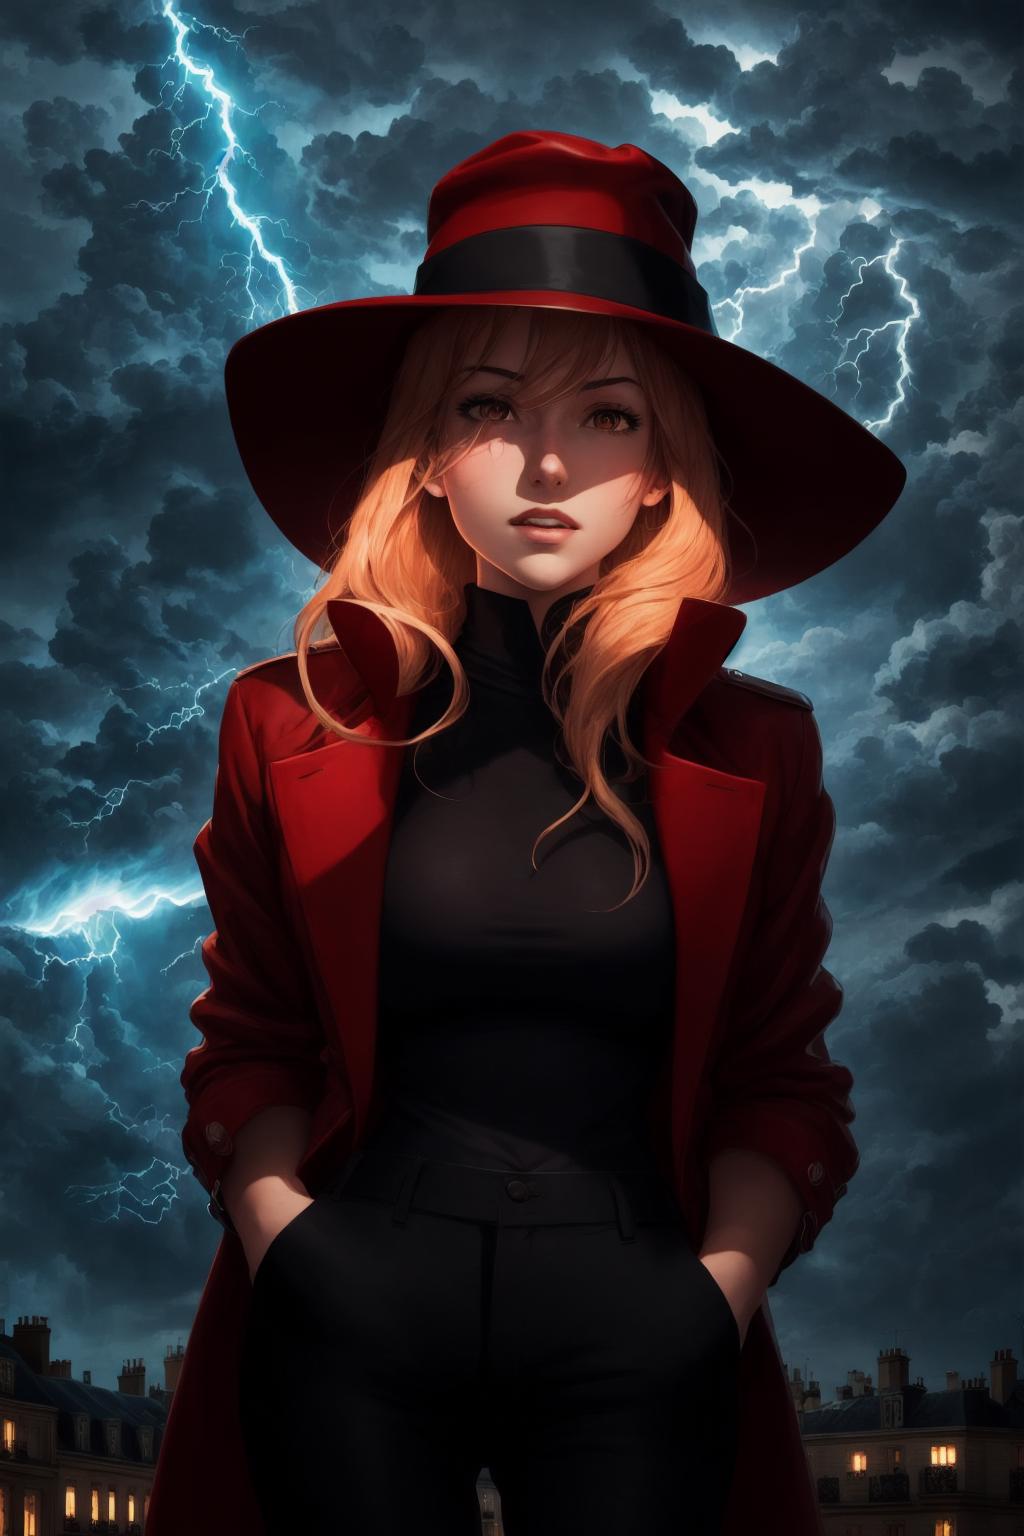 Carmen Sandiego - Trained on Anime Model image by afterlifesol